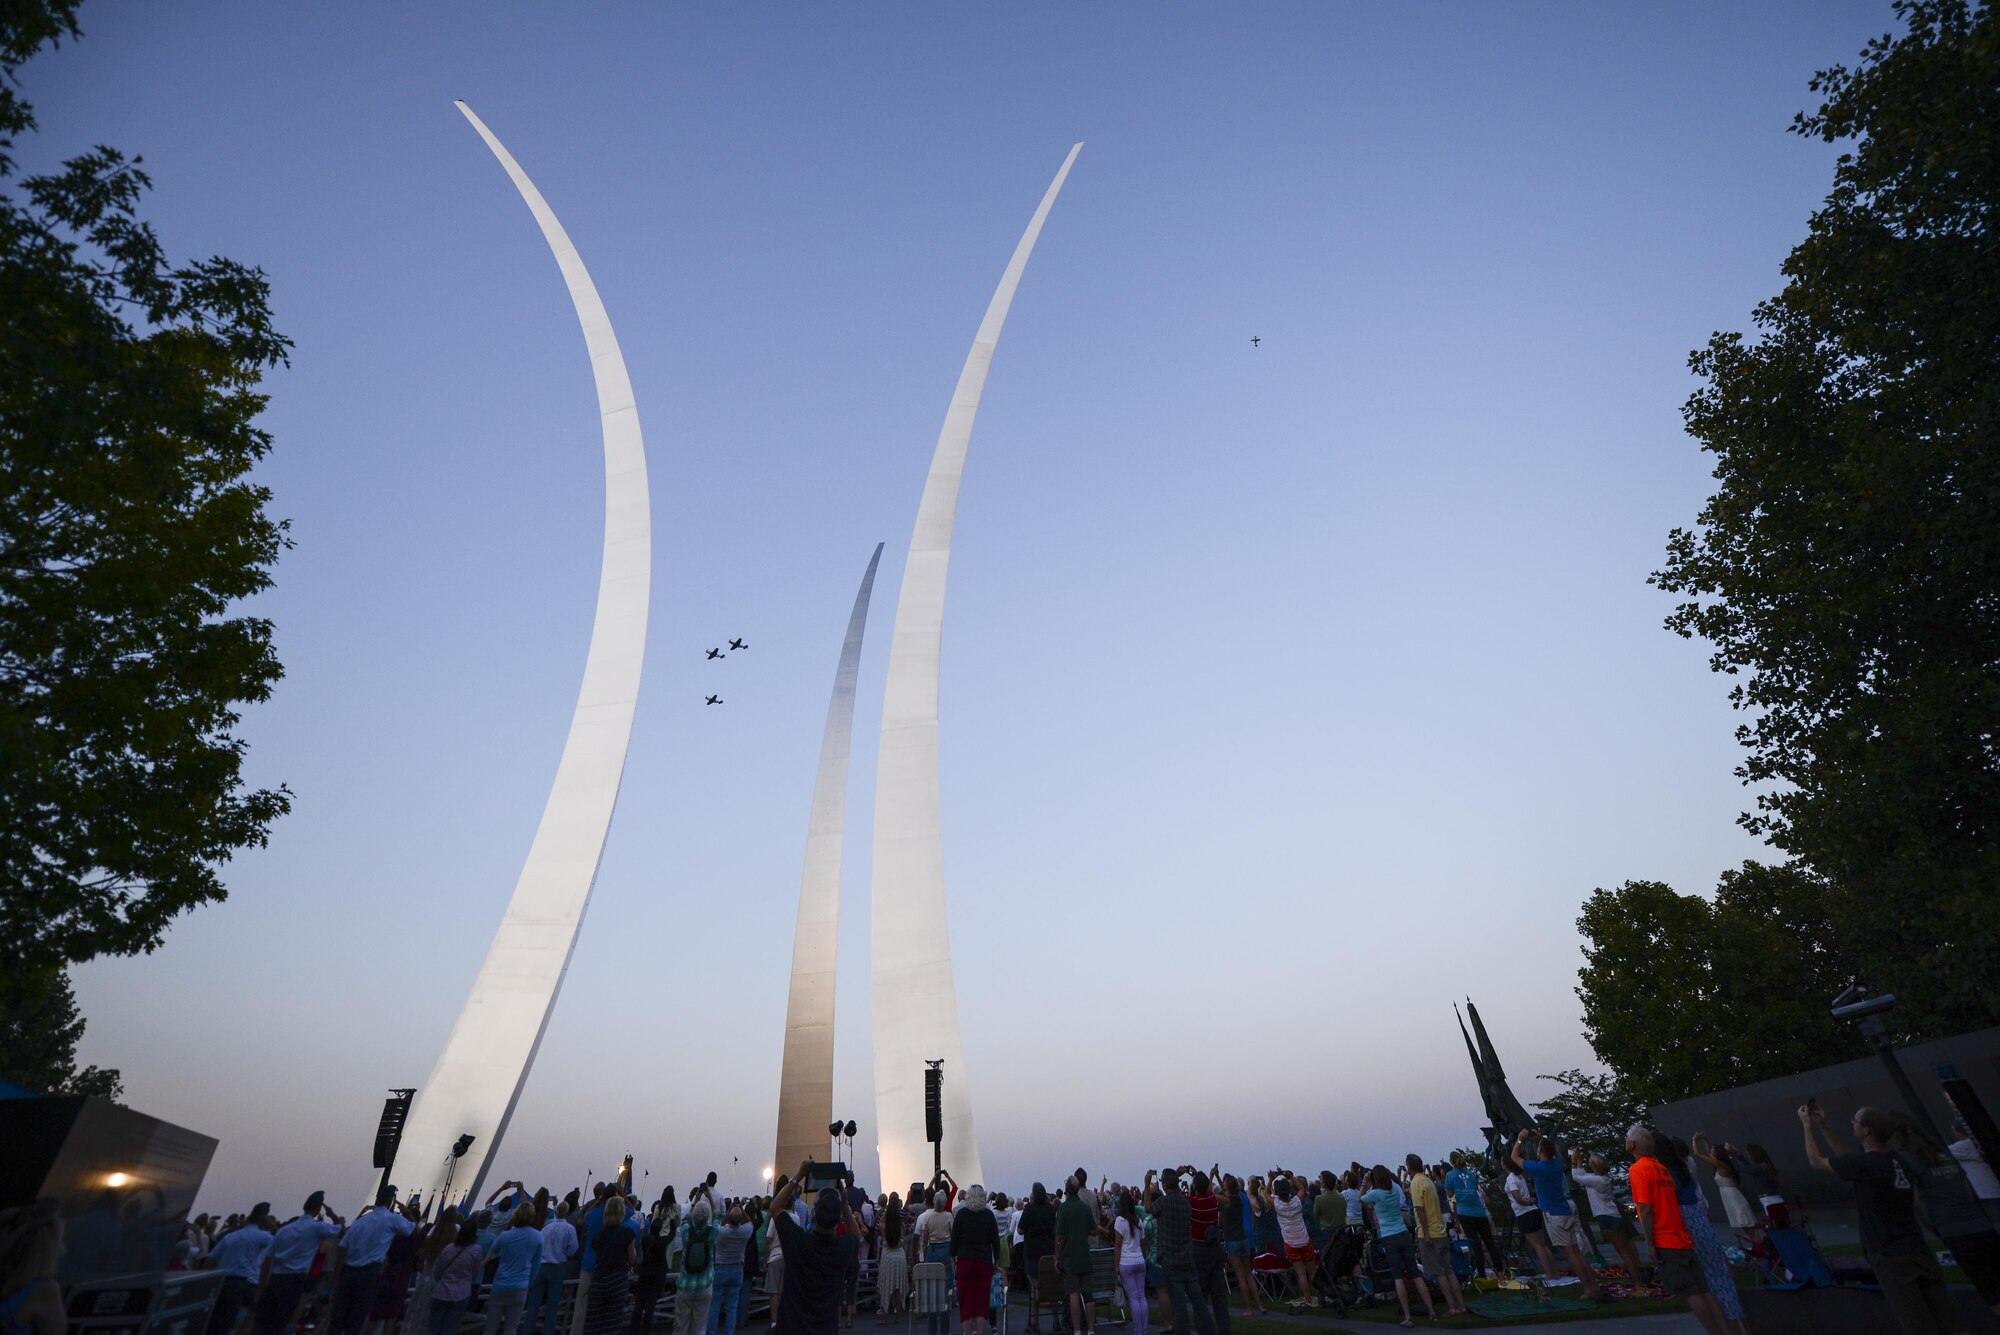 A formation of P-51 Mustangs perform a flyover at the Air Force Memorial in Arlington, Virginia, commemorating the 70th anniversary of the end of World War II, Aug. 14, 2015. The Air Force Band also put on a concert playing music from the World War II era. (Air Force photo/Tech. Sgt. Joshua L. DeMotts)